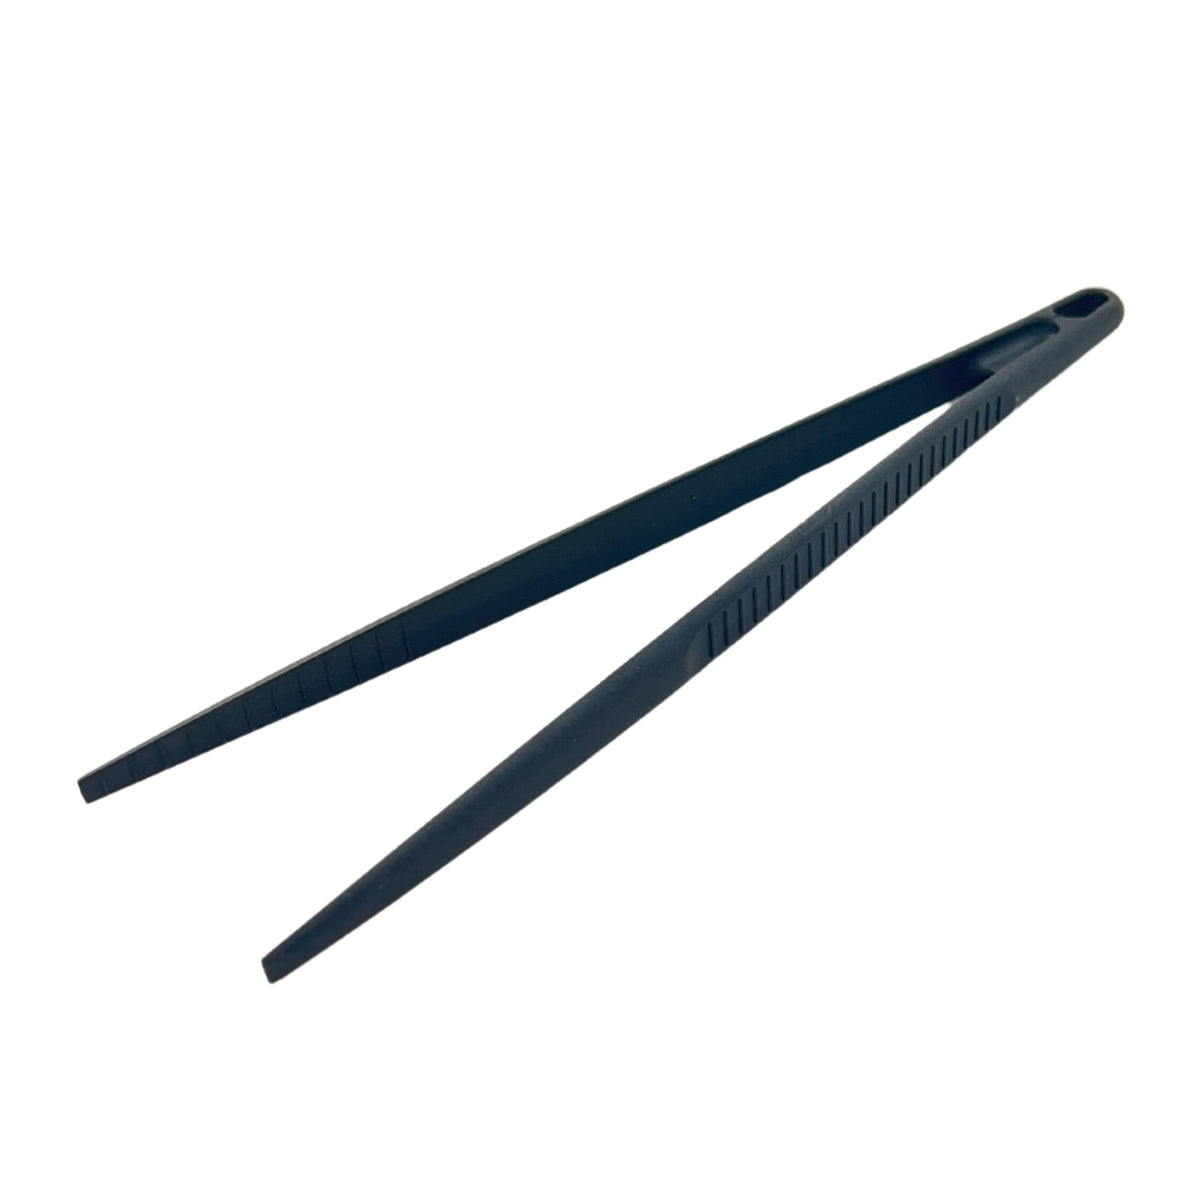 Pincers Tongs - BlackMade of Plastic